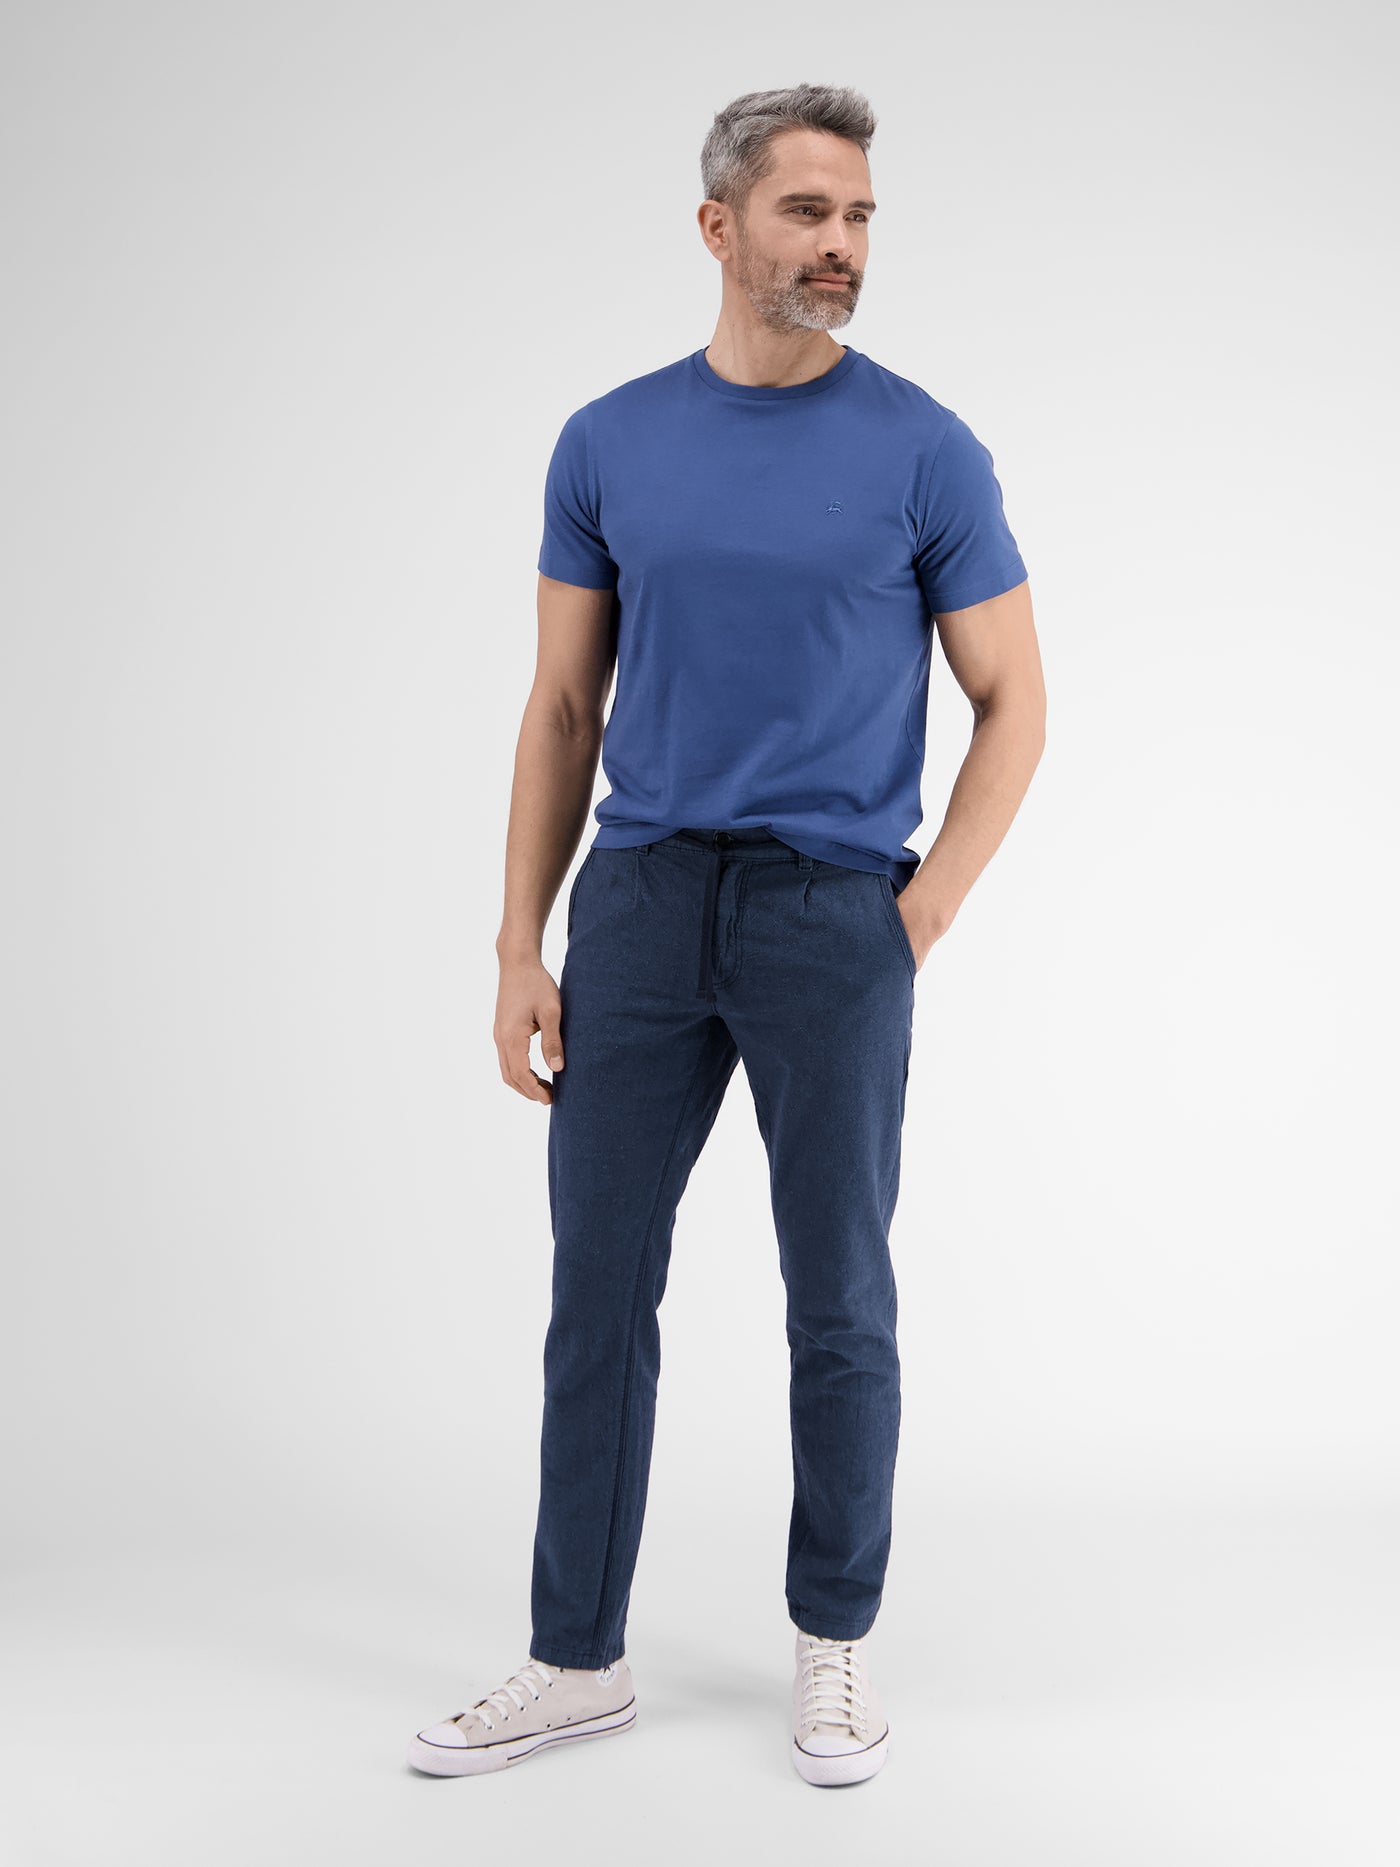 Chinos in light linen-cotton quality